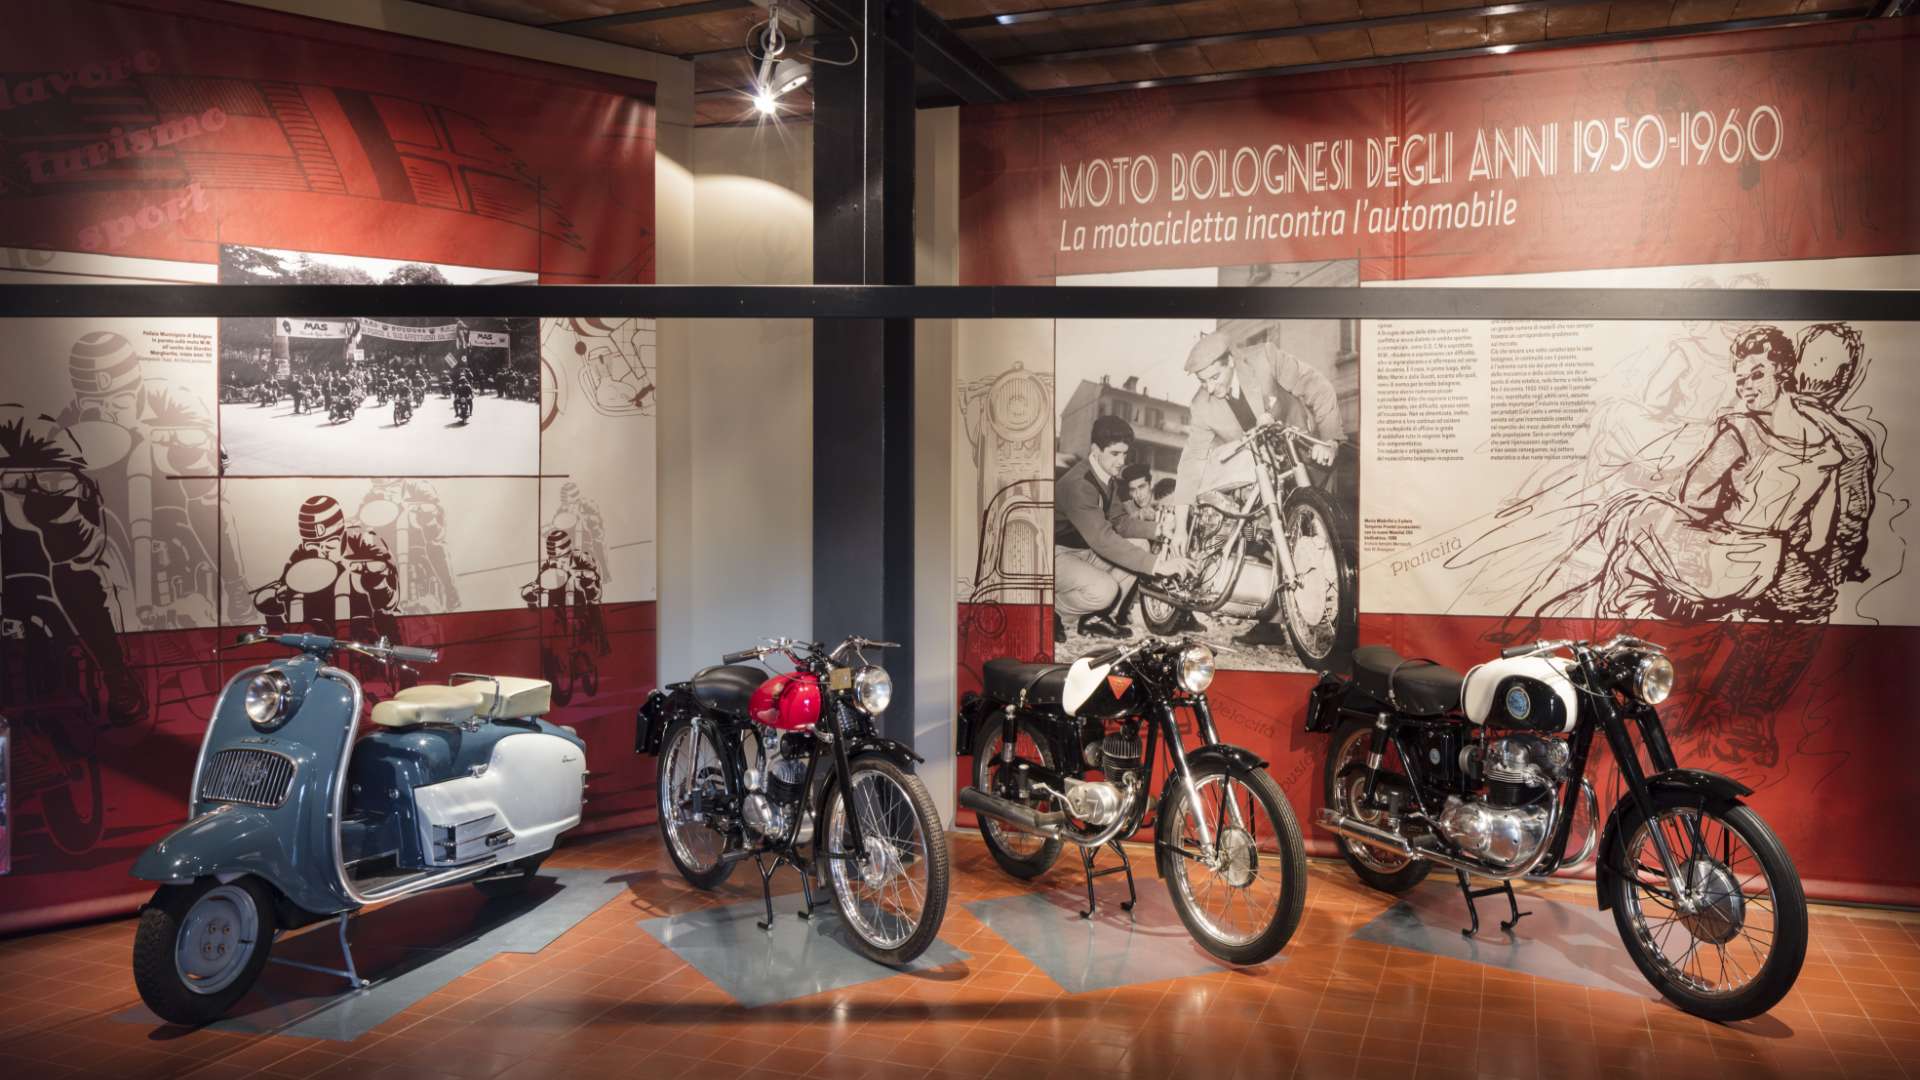 Moto bolognesi of the 50s-60s, in the Motor Valley an exhibition that celebrates a great past.